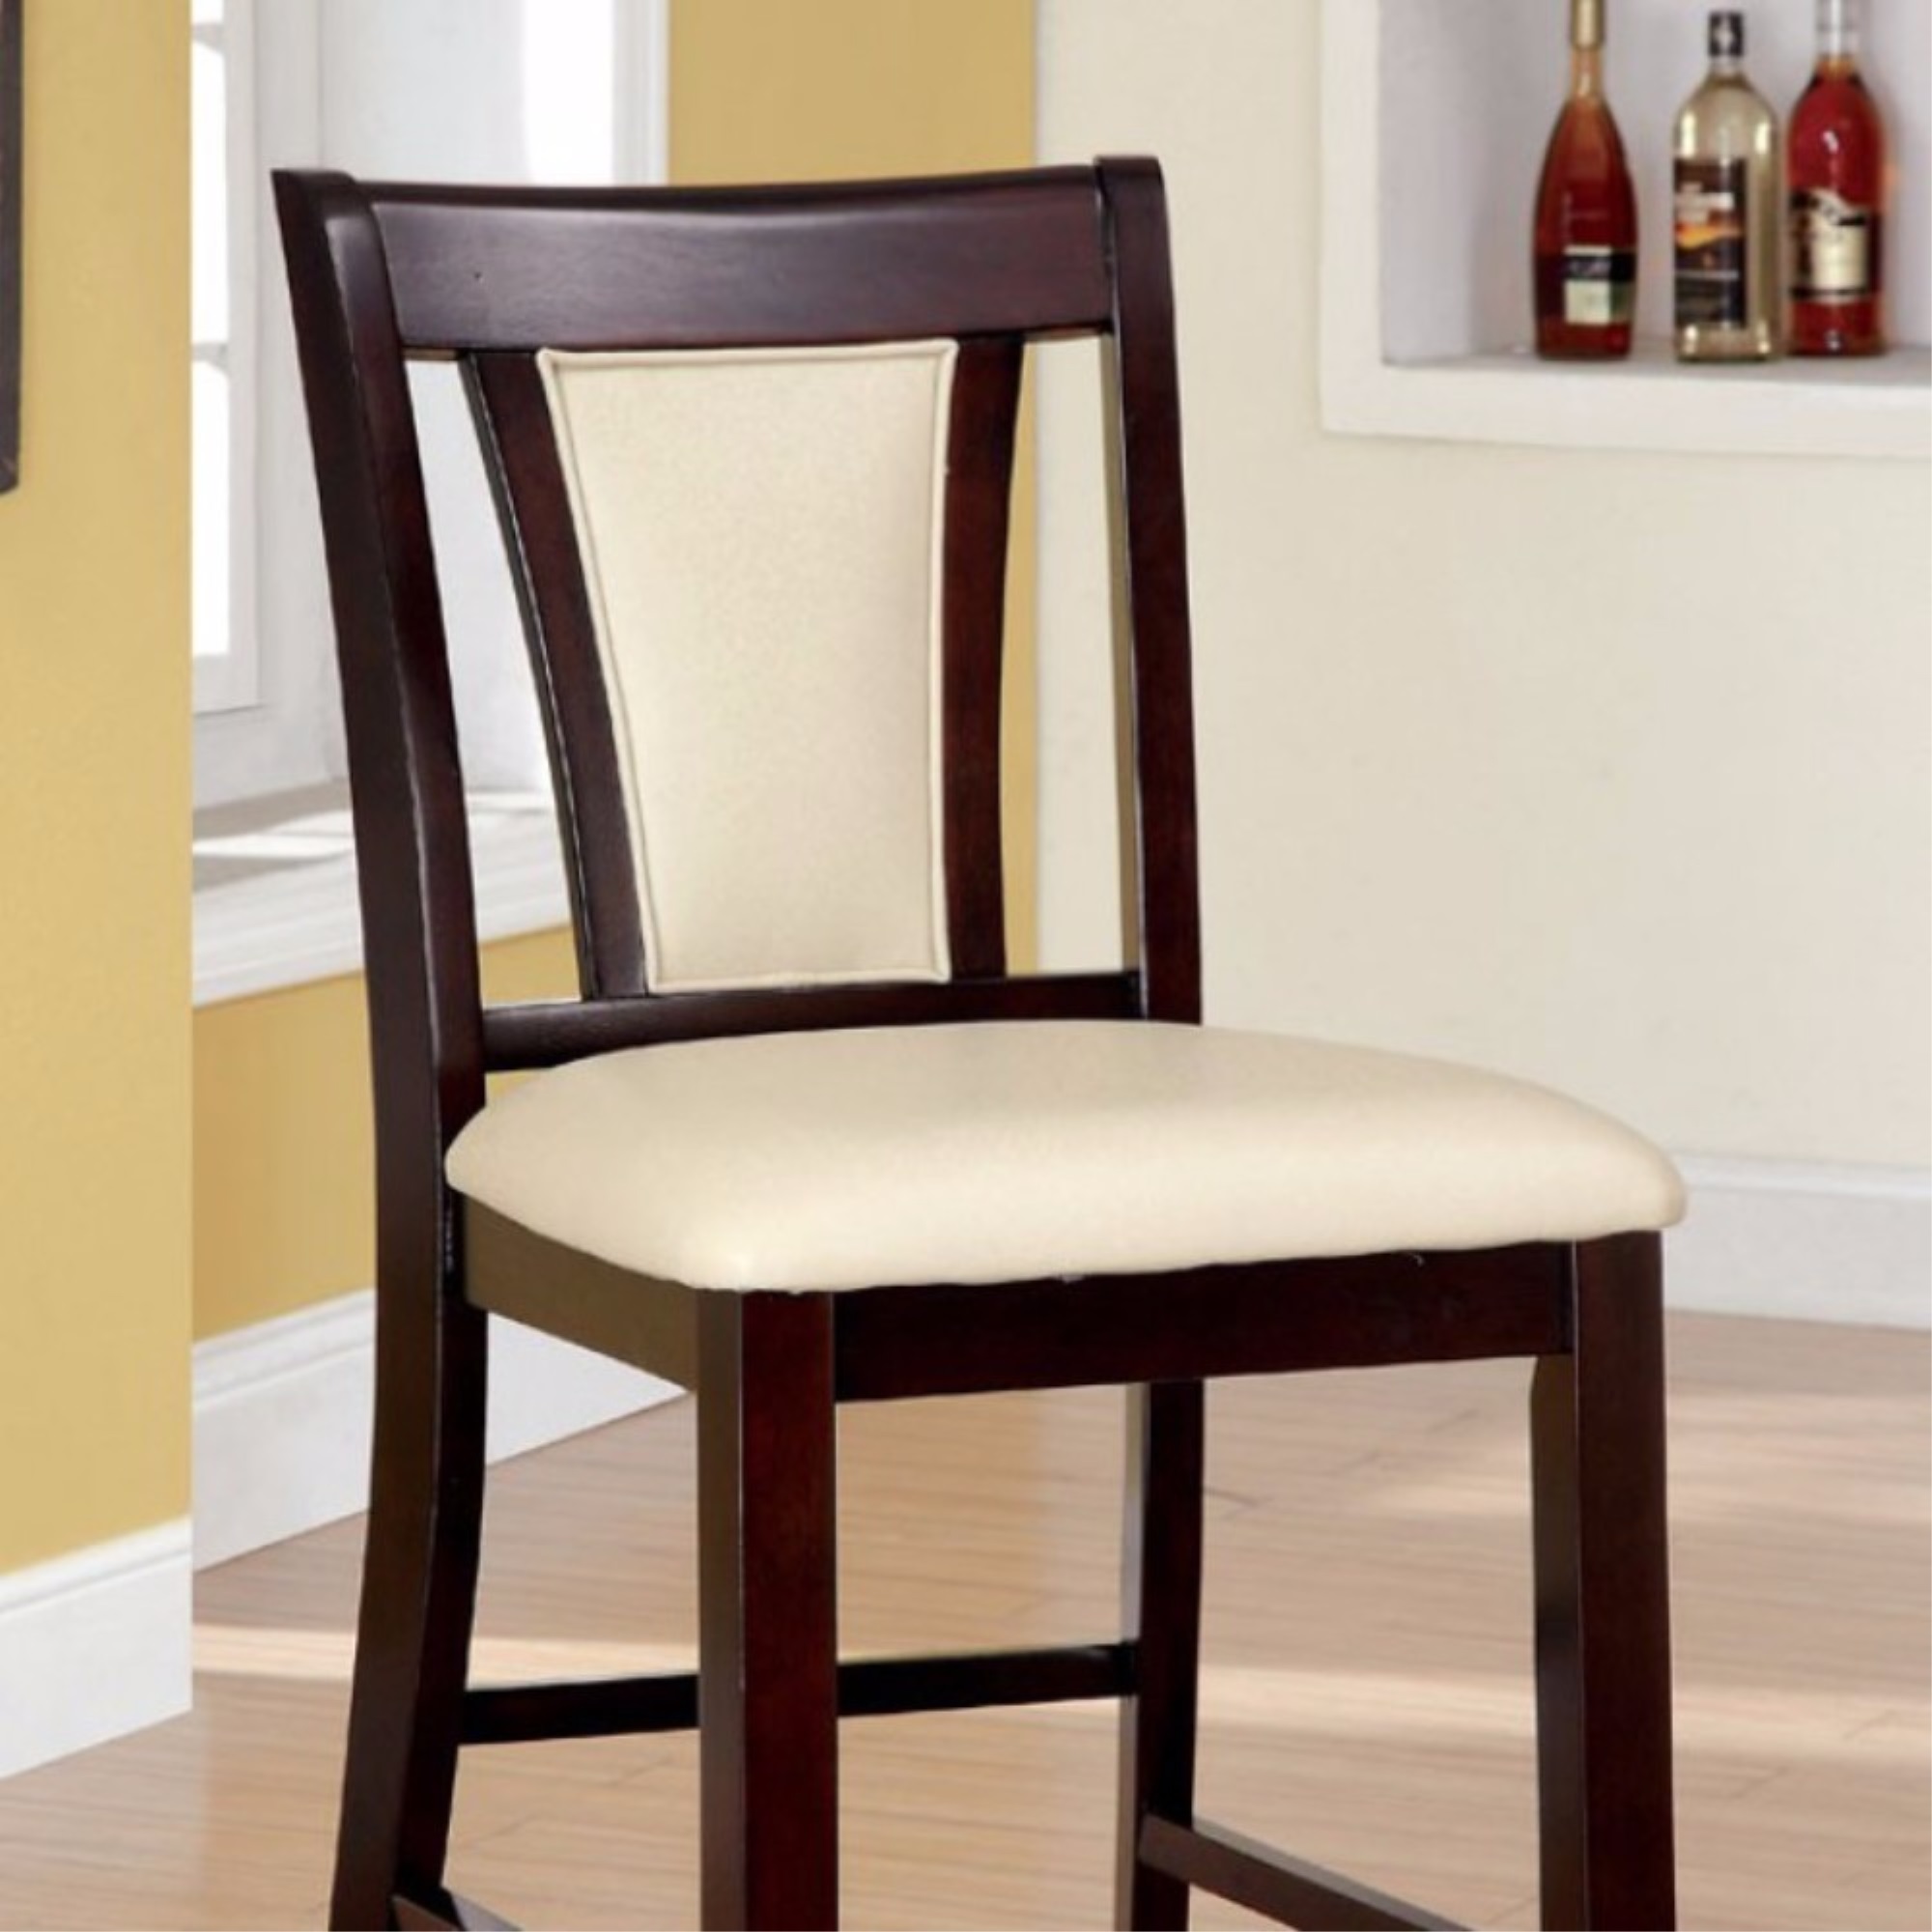 Benzara Wooden Counter Height Chair With Padded Seat and Back, Pack of 2, Brown & Ivory